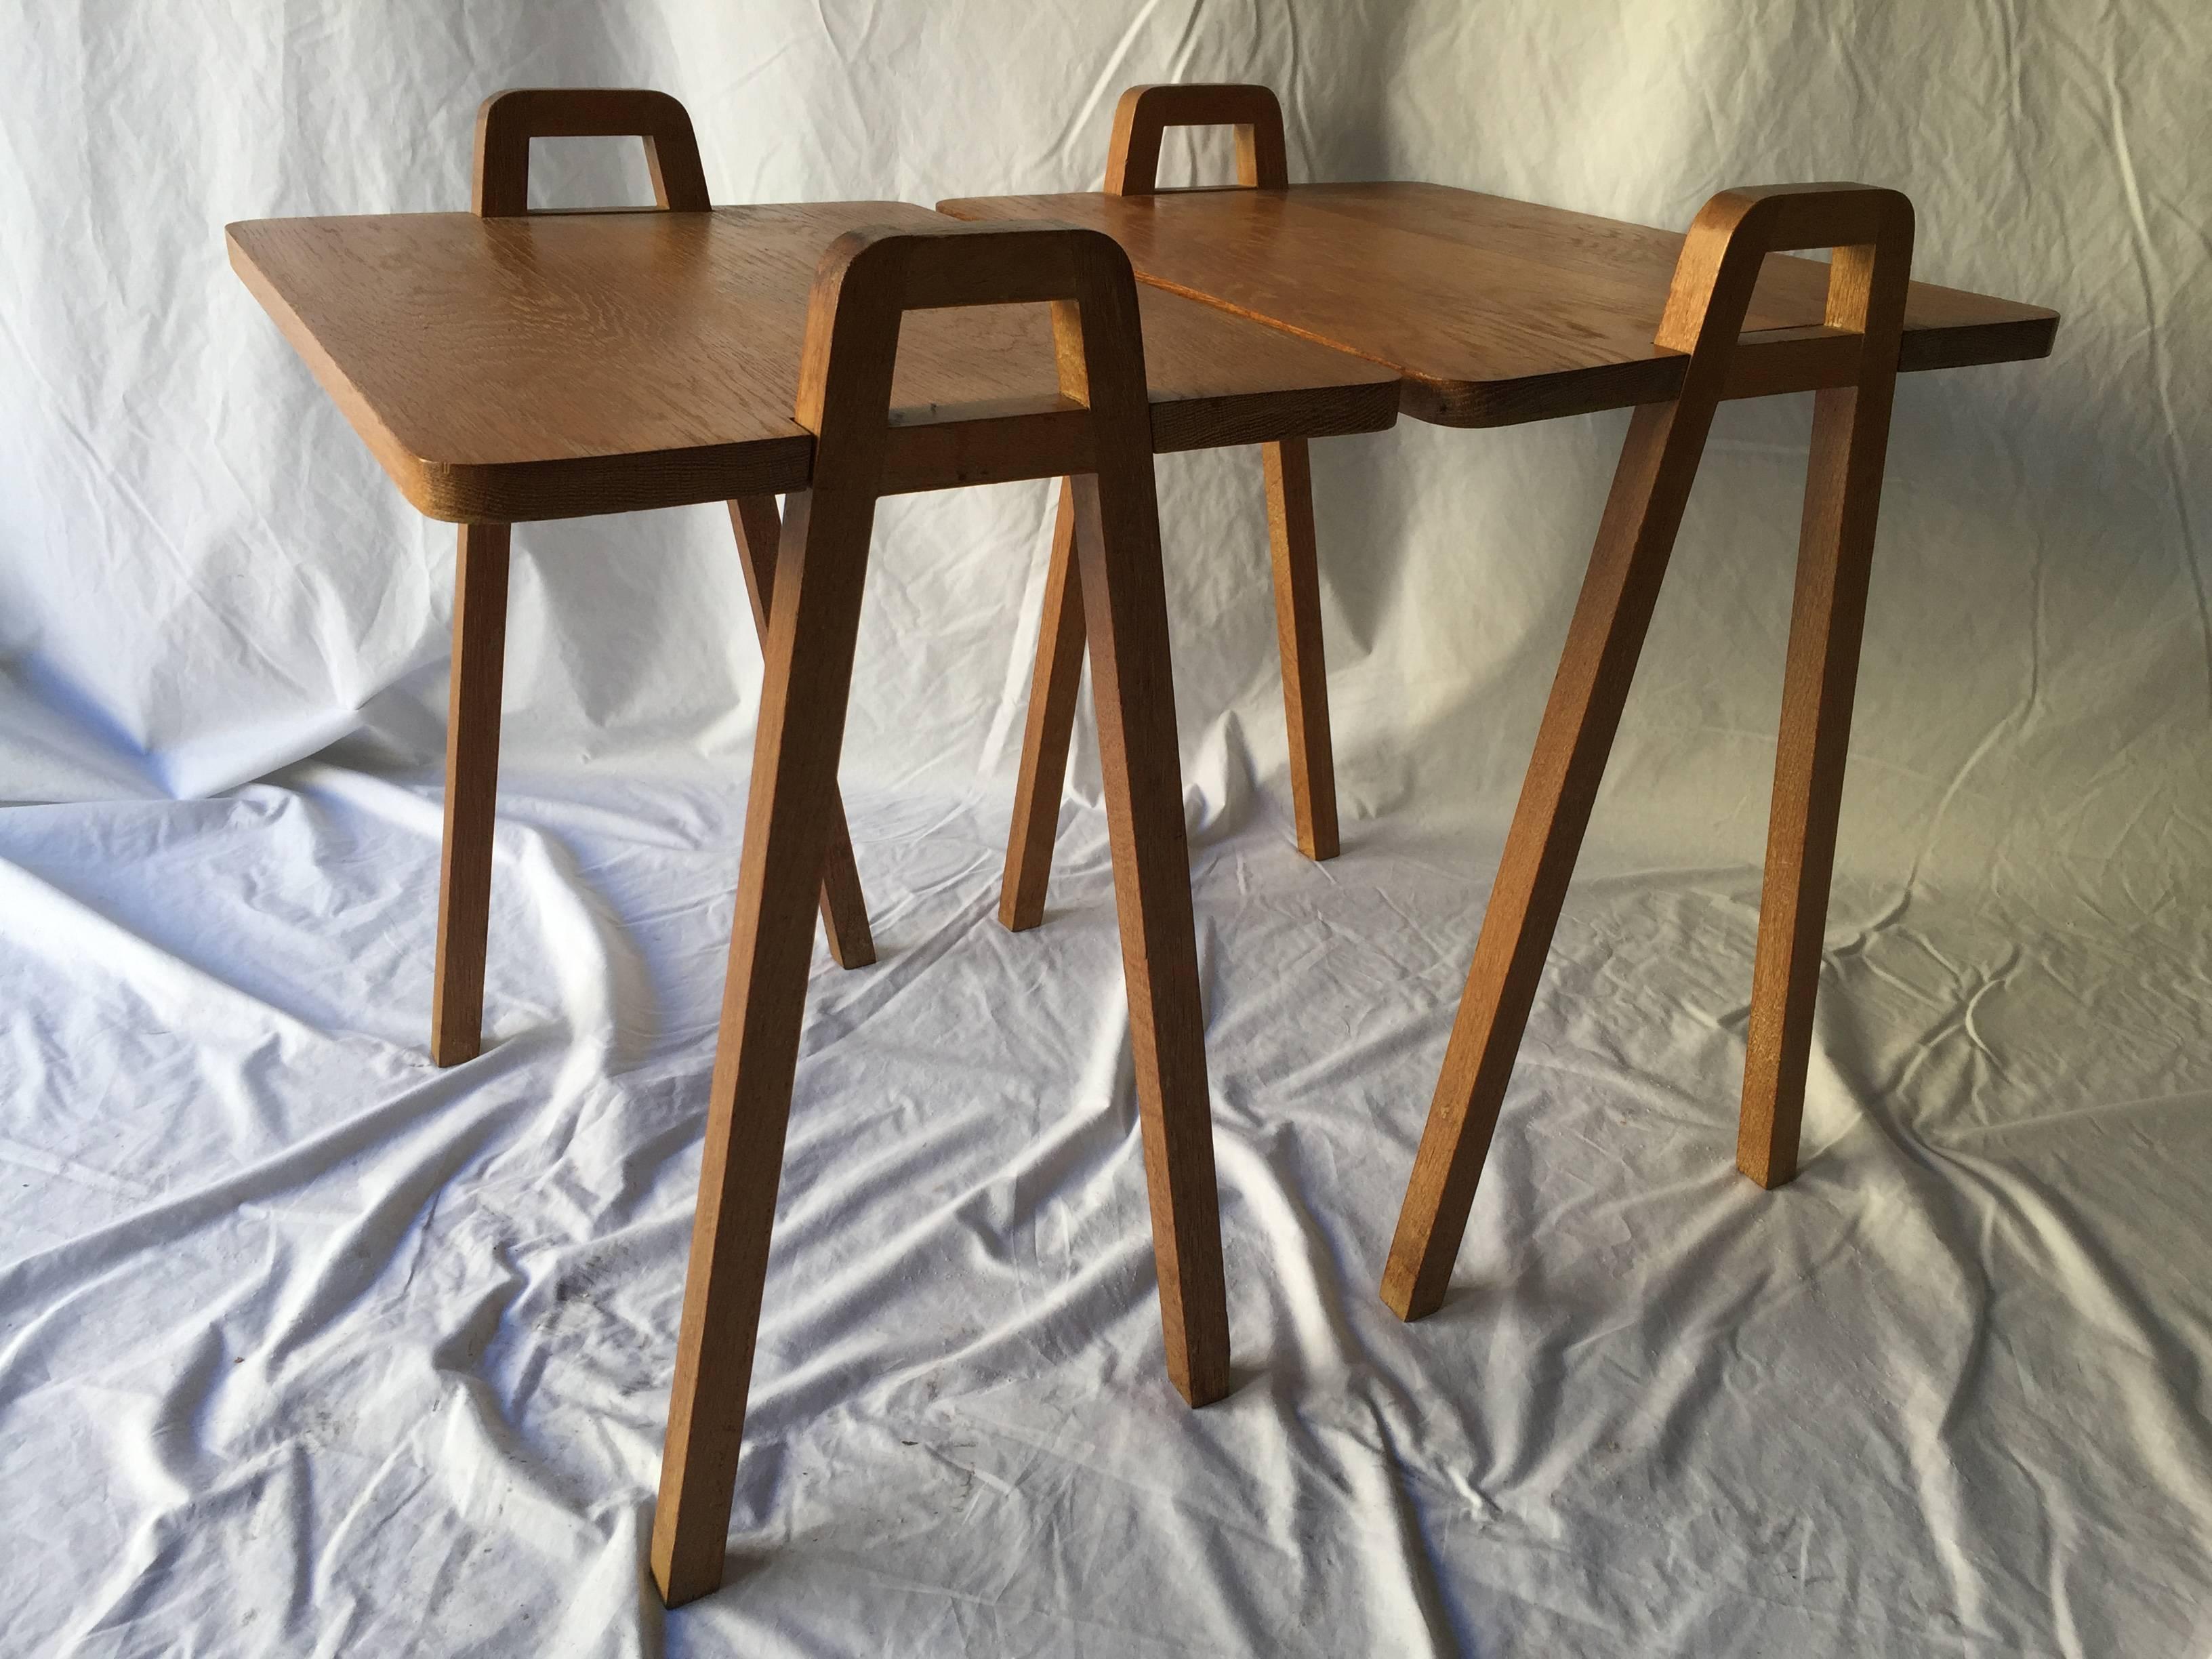 Perfect for your Mid-Century decor and your Hungry Man TV dinner. This pair of tray style end tables made of solid oak has removable tops (word to the wise, the tray tops have been screwed on by a block of wood - to my eye this is not original) and